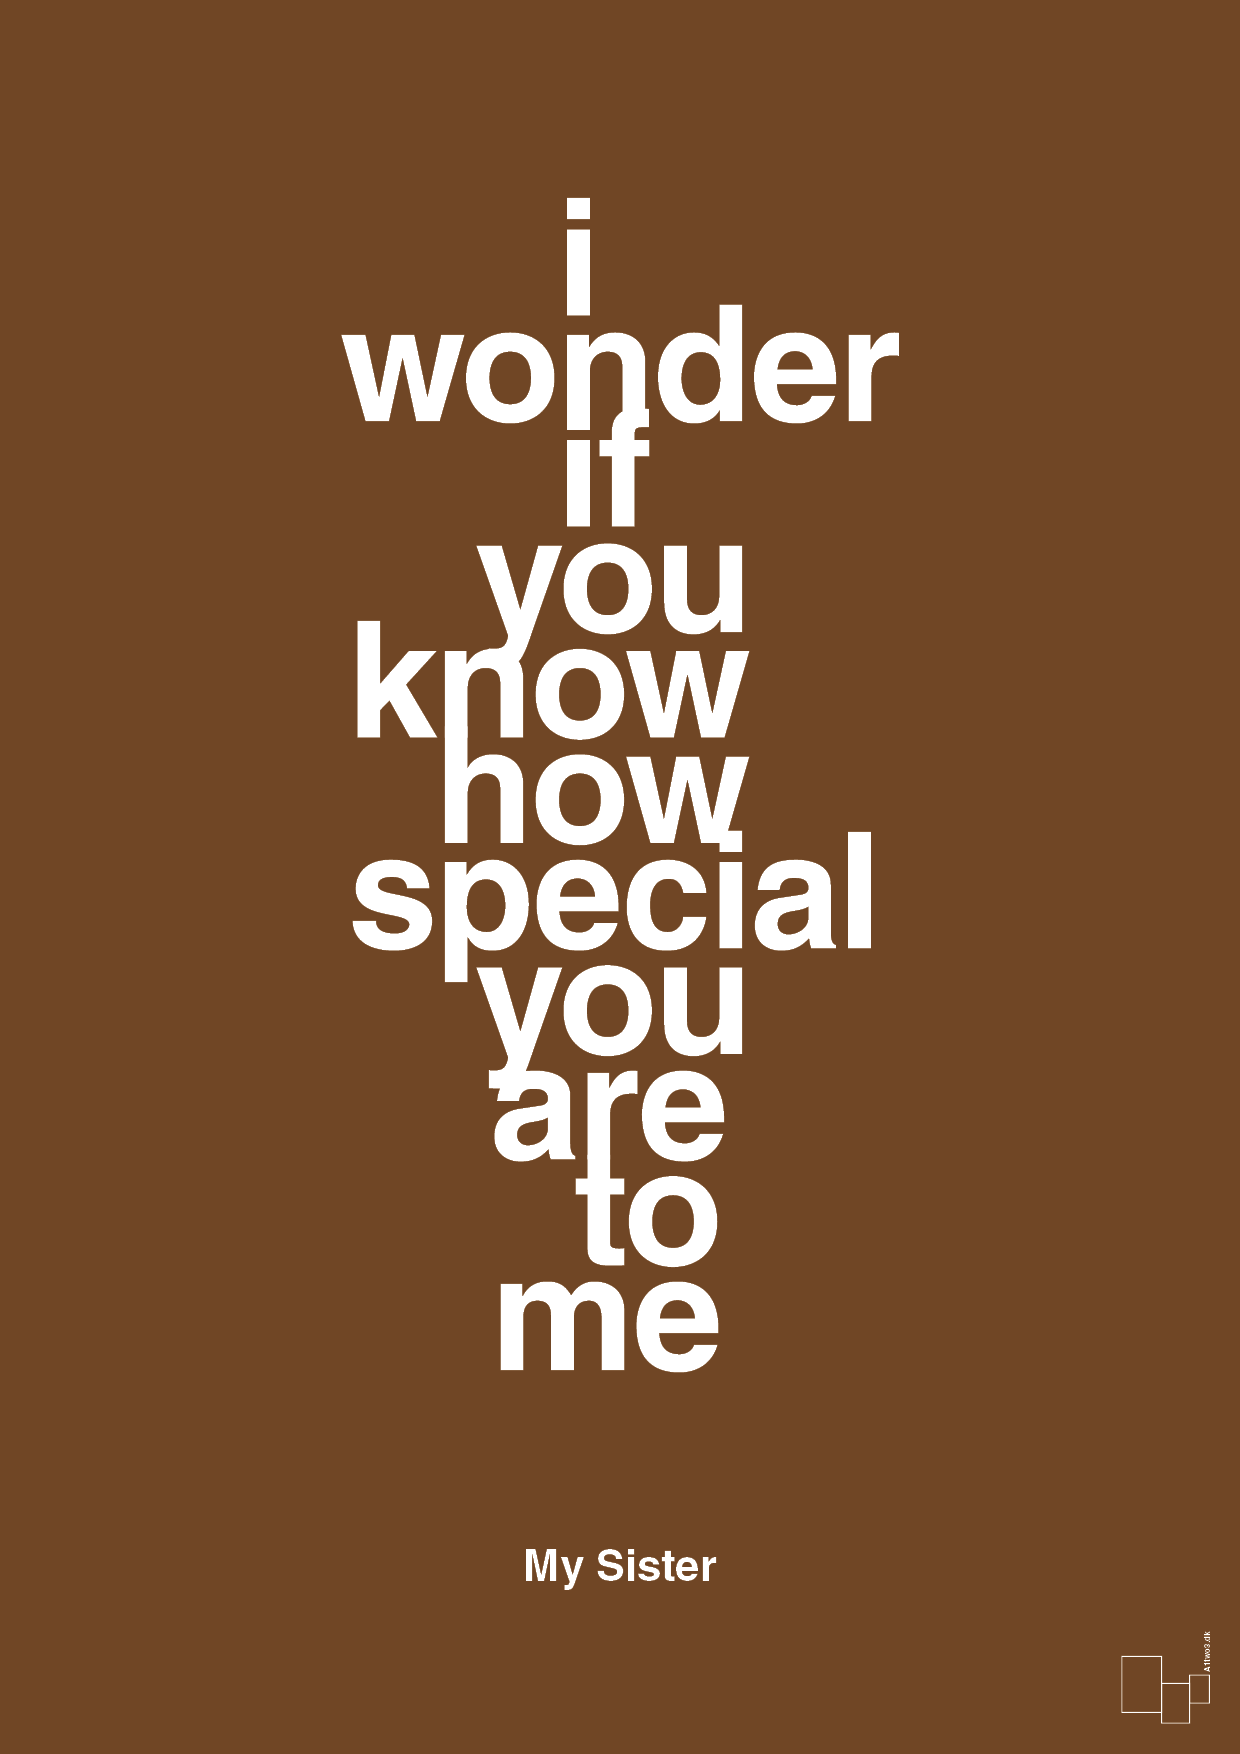 my sister - i wonder if you know how special you are to me - Plakat med Citater i Dark Brown